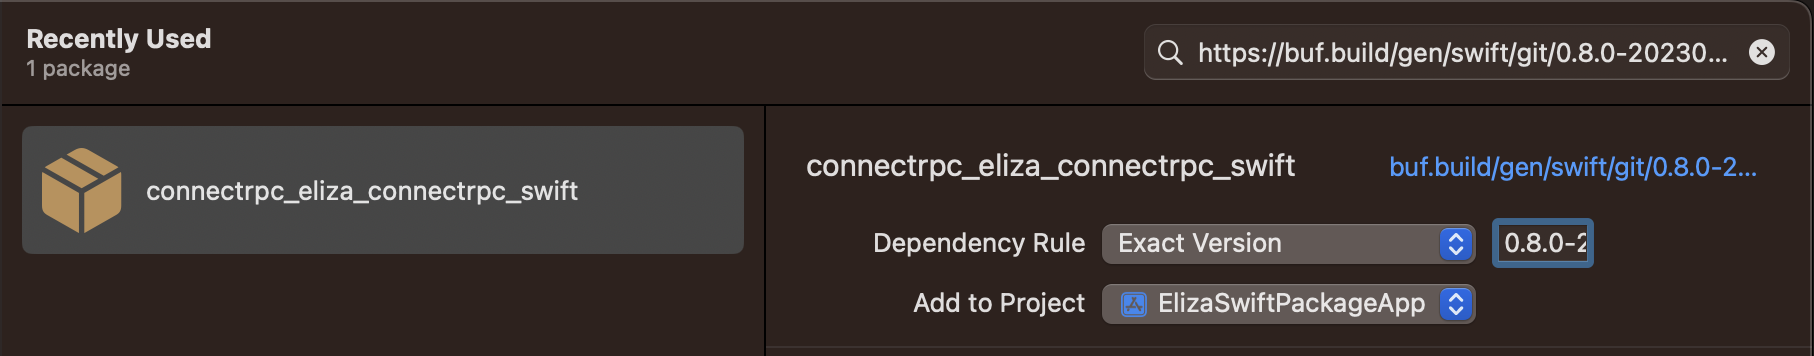 Screenshot of xcode with package popup and eliza package selected